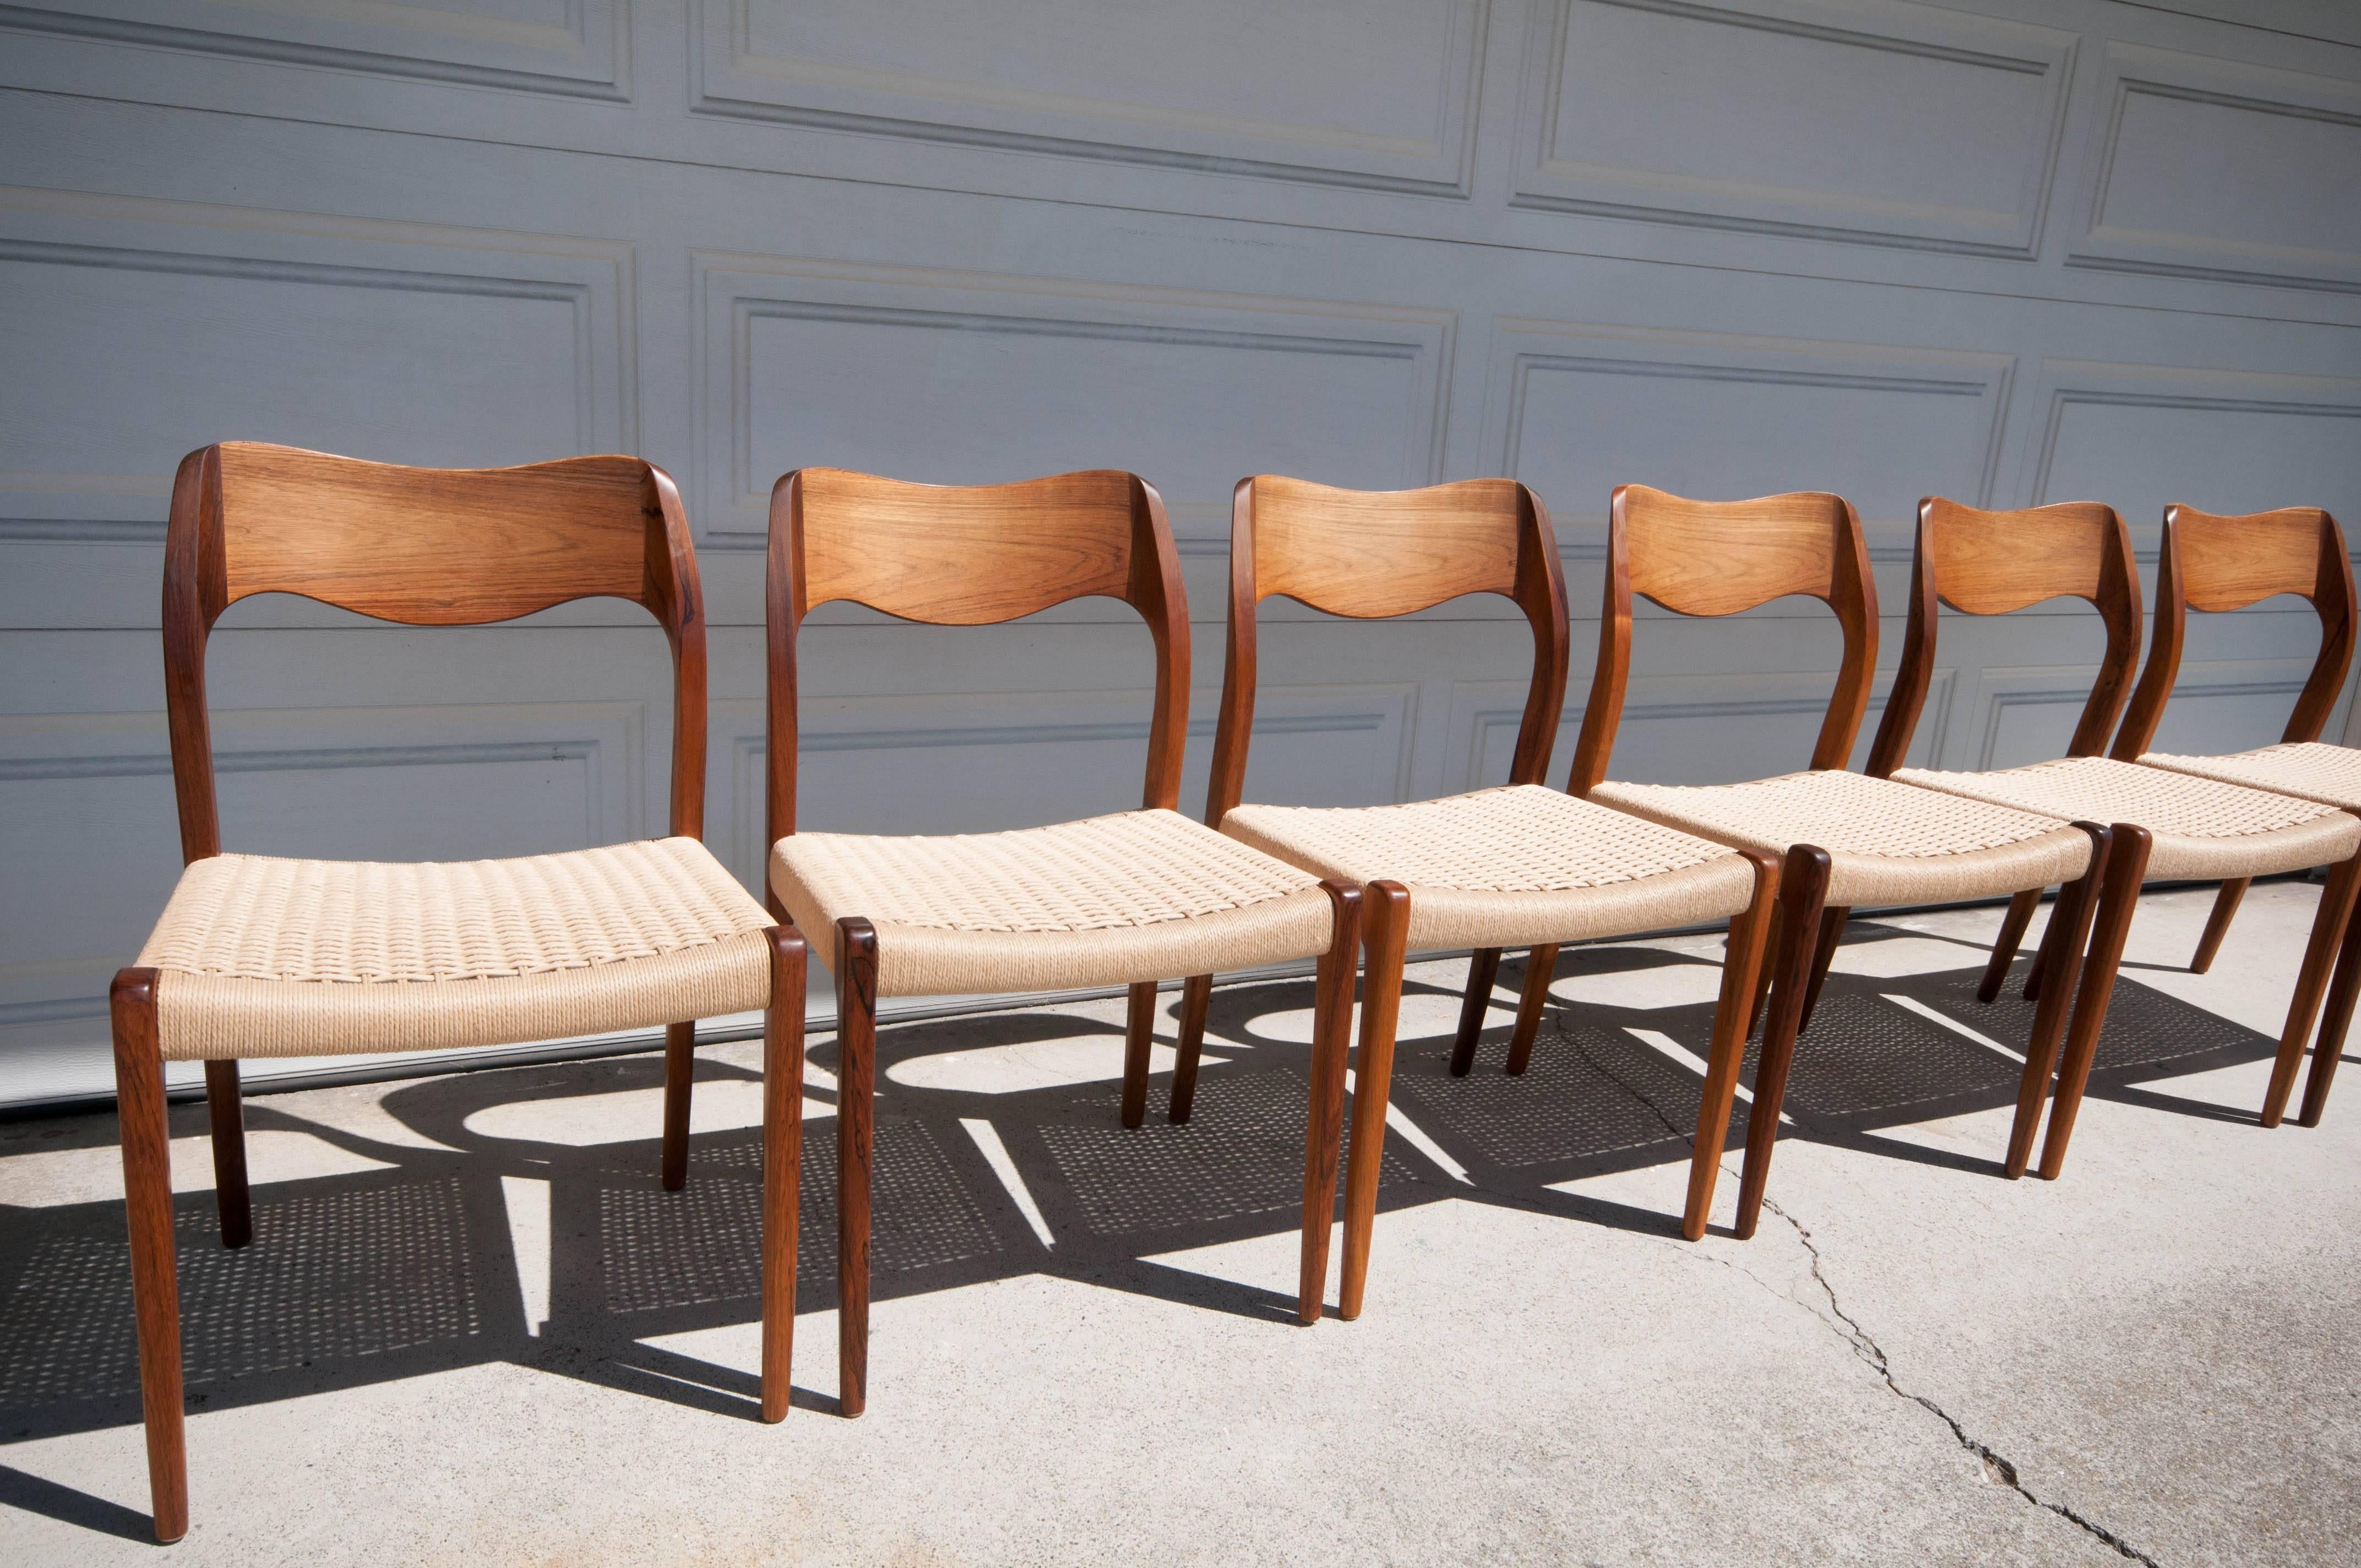 Danish Niels Moller 71 Dining Chairs in Brazilian Rosewood. This set of six and has brand new paper cord seating and stunning rosewood grains.  Price is for the set of six chairs.